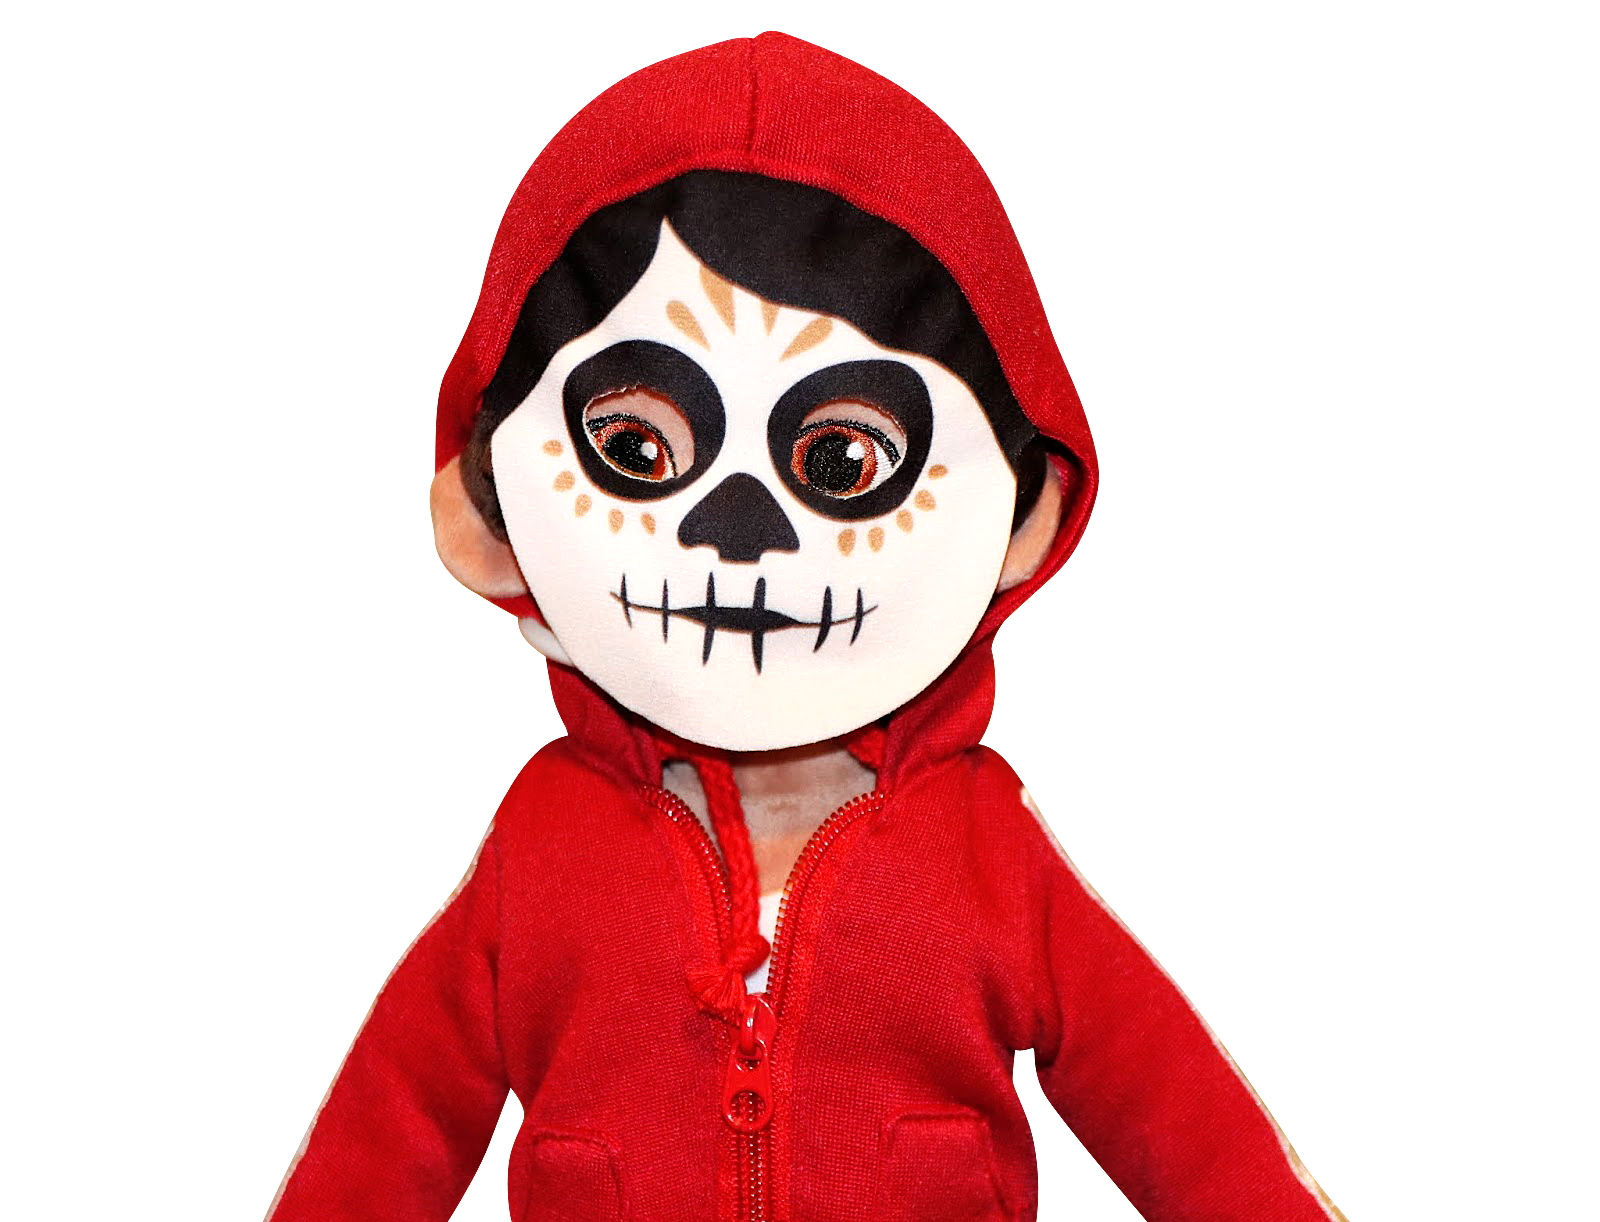 DISNEY STORE COCO MIGUEL PLUSH HOODIE WITH WORKING ZIPPER FELT FACEPAINT MASK